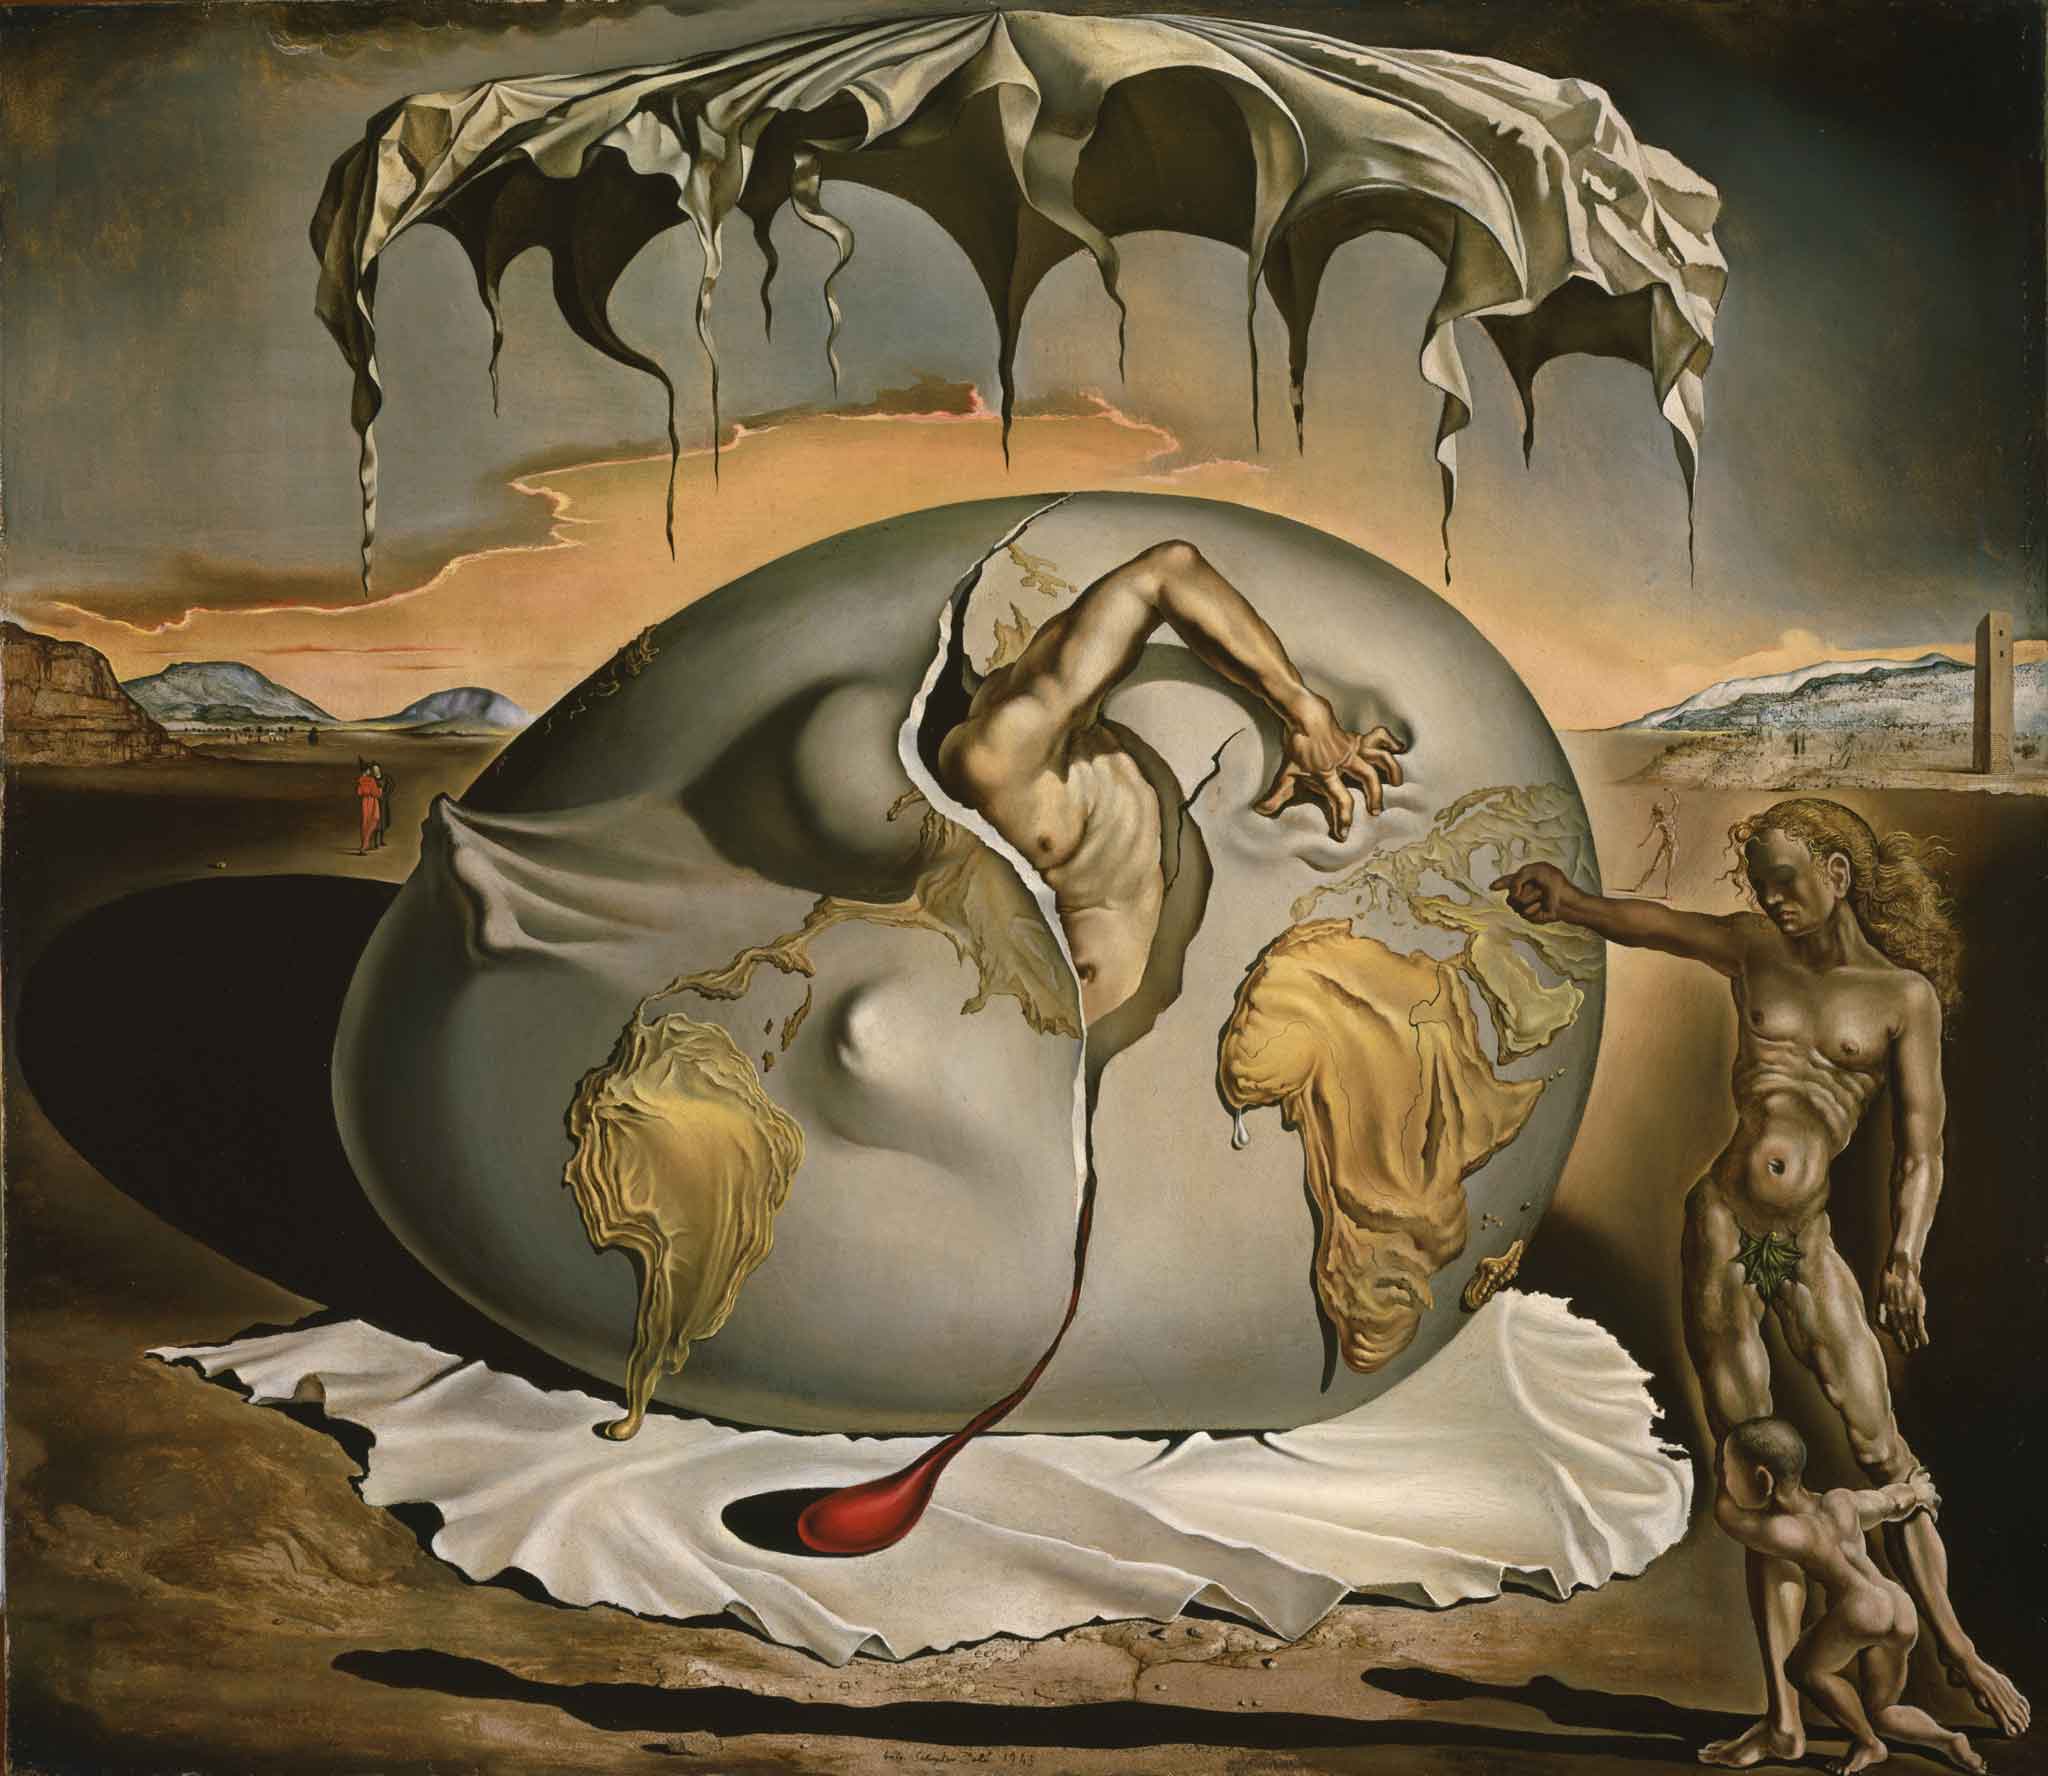 Pintura "Geopoliticus Child Watching the Birth of the New Man", de Dalí